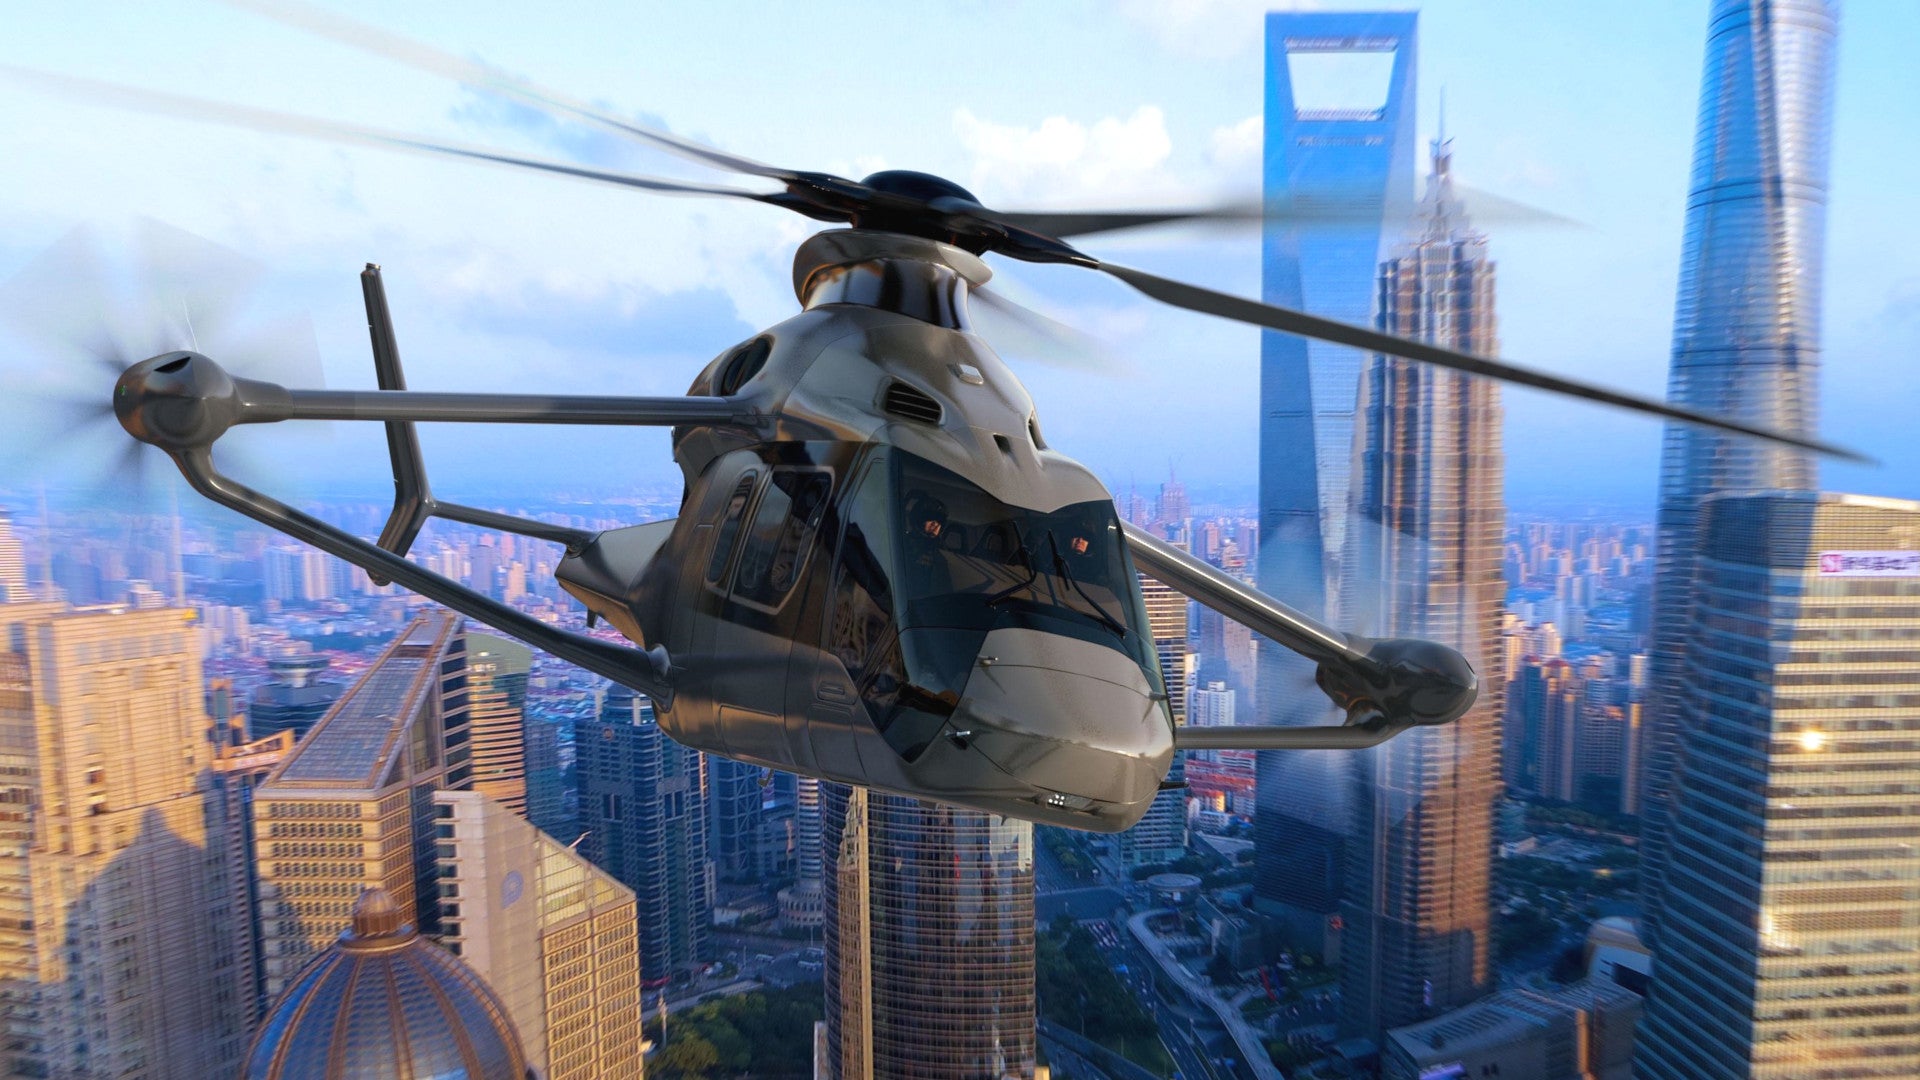 Airbus’s Record-Setting Compound Helicopter Could Become The Army’s New Armed Scout Chopper